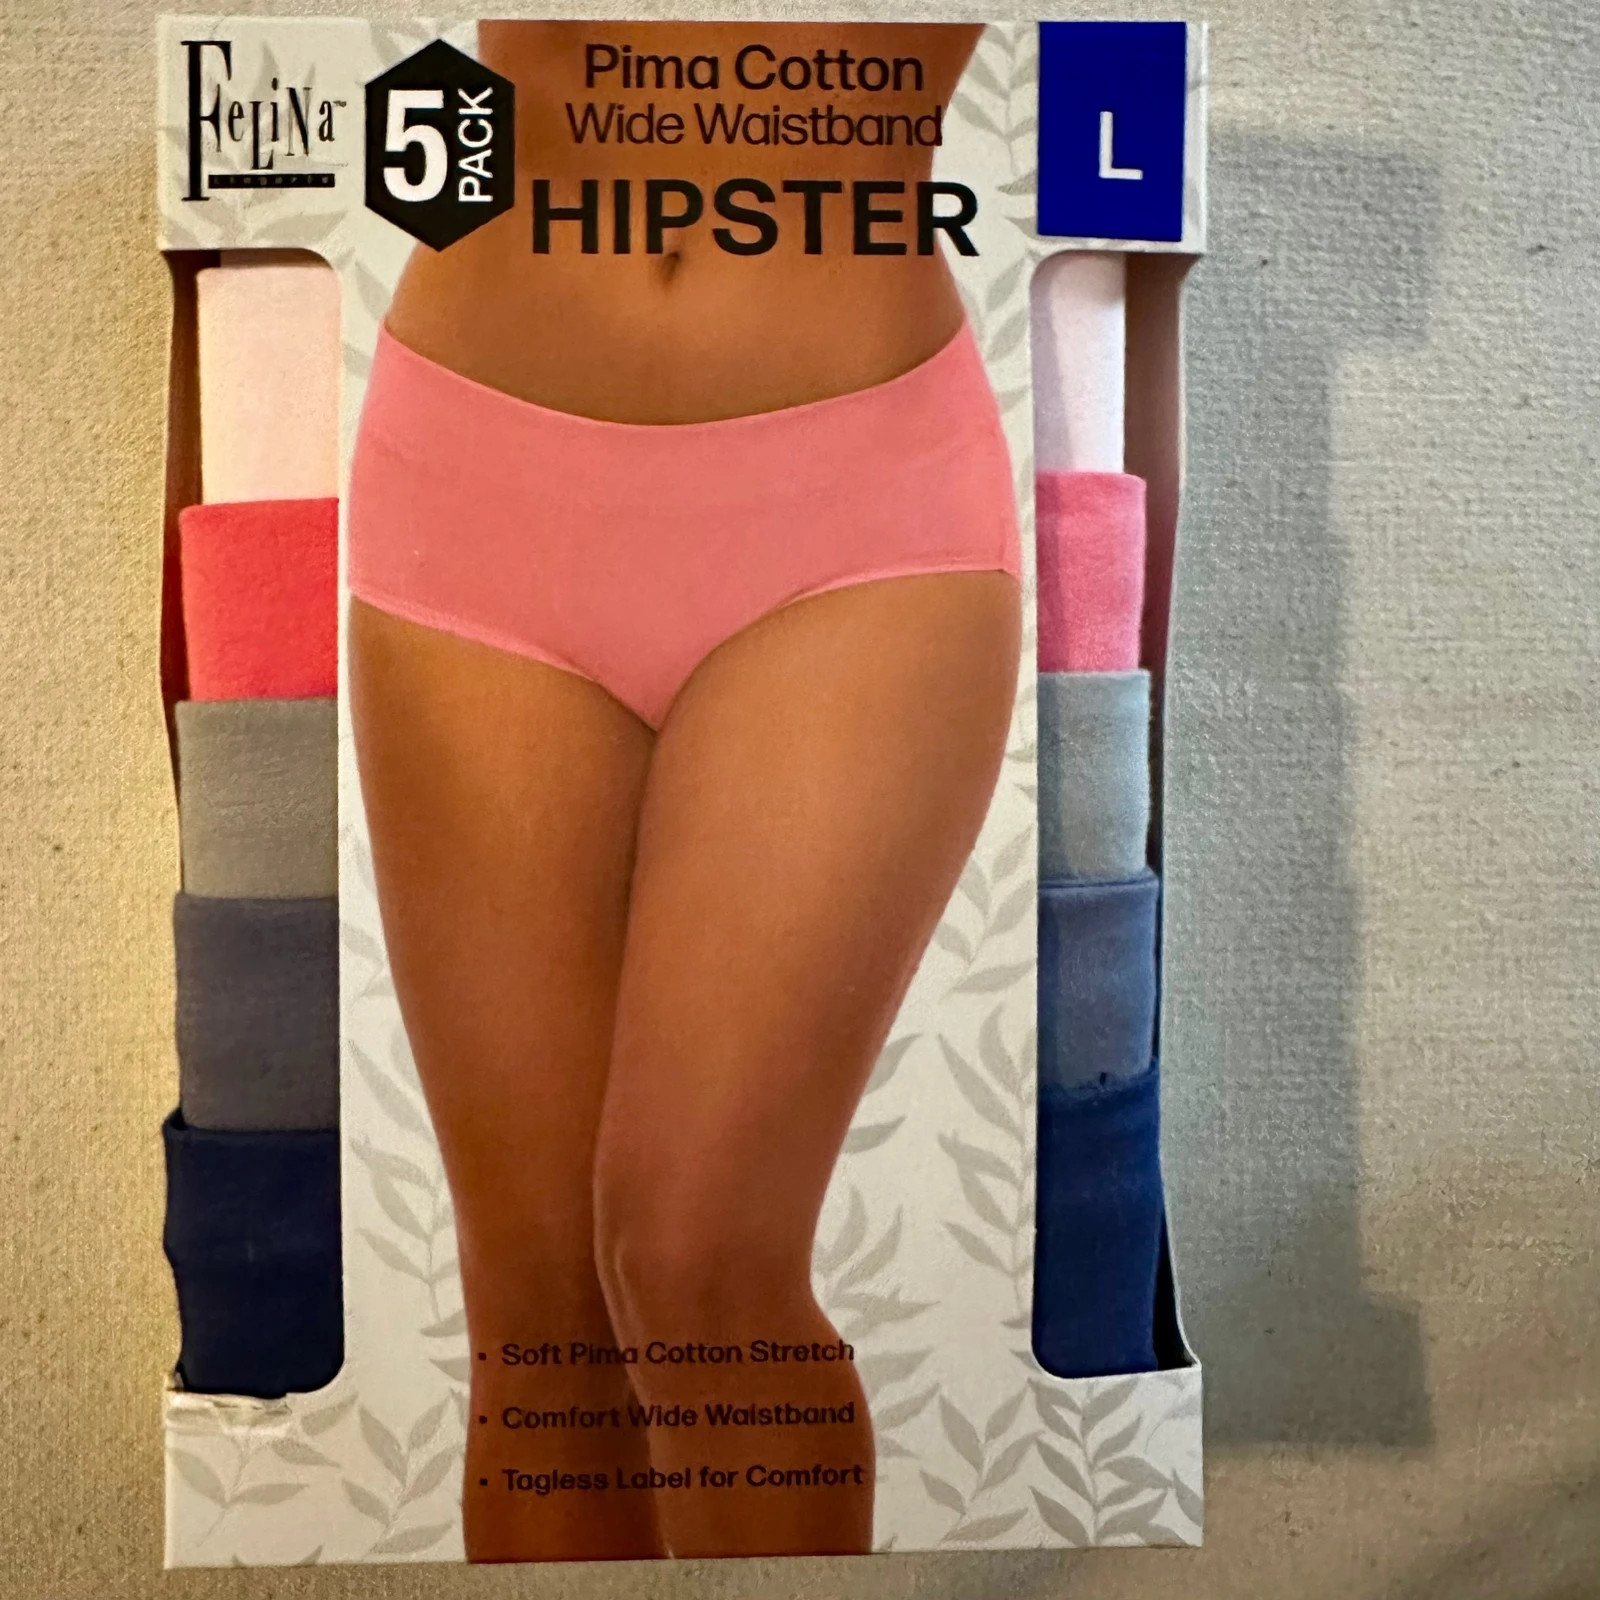 Felina Pima Cotton Wide Waistband Hipster 5-Pack size L Brand New